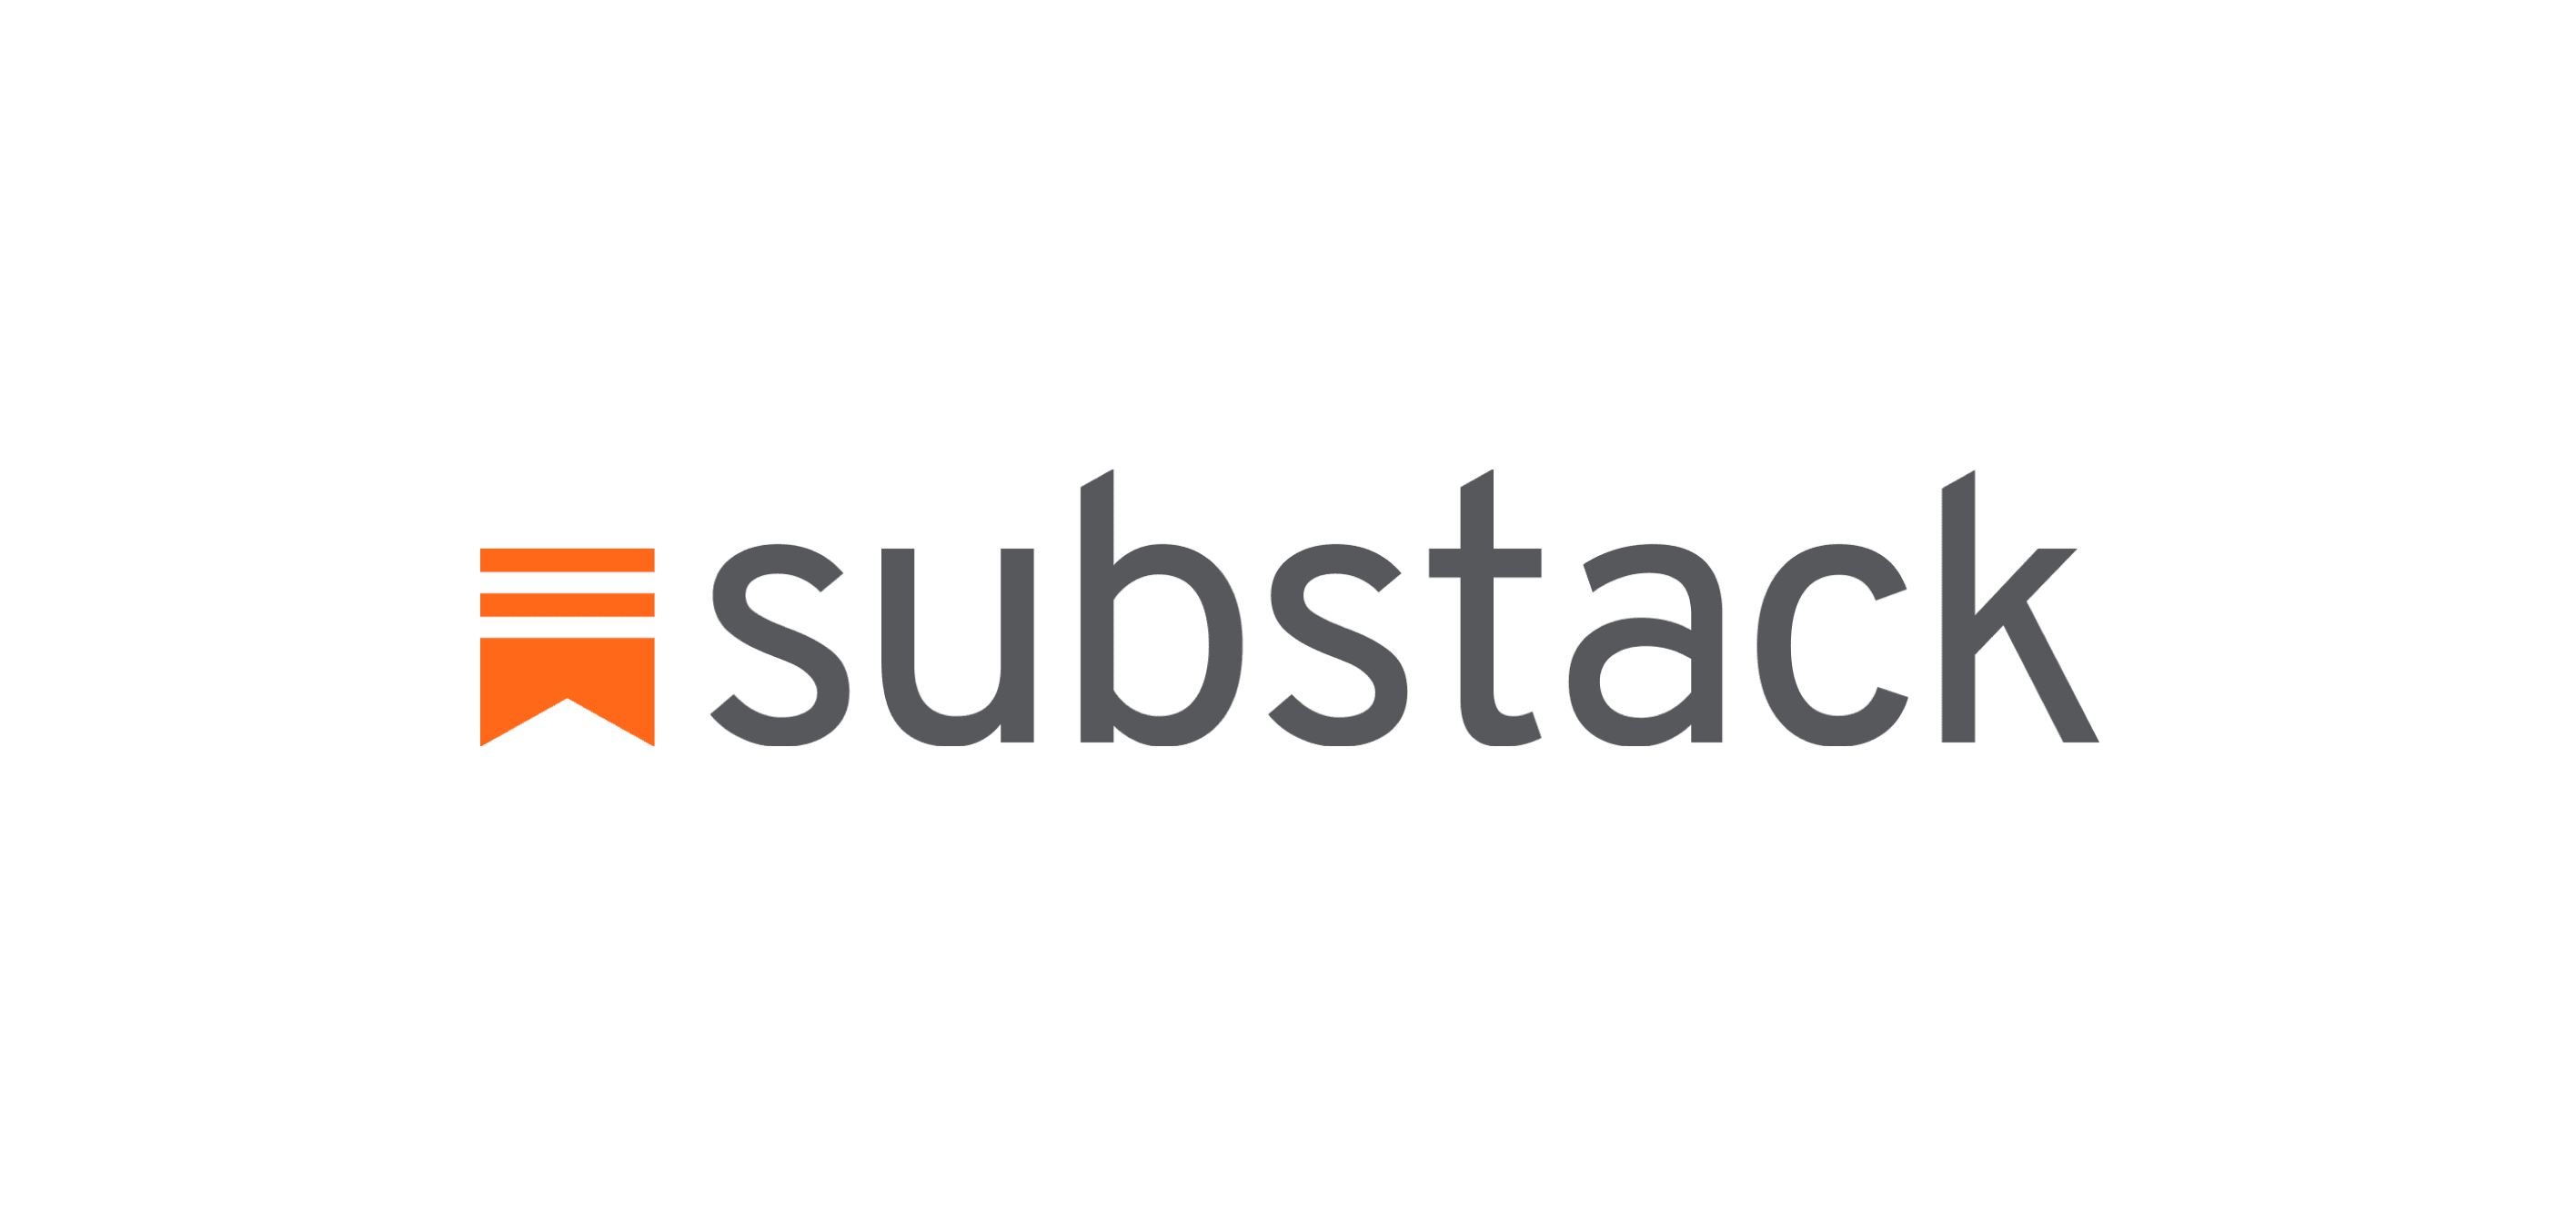 If I started a newsletter about domain name investing on Substack, would you subscribe?